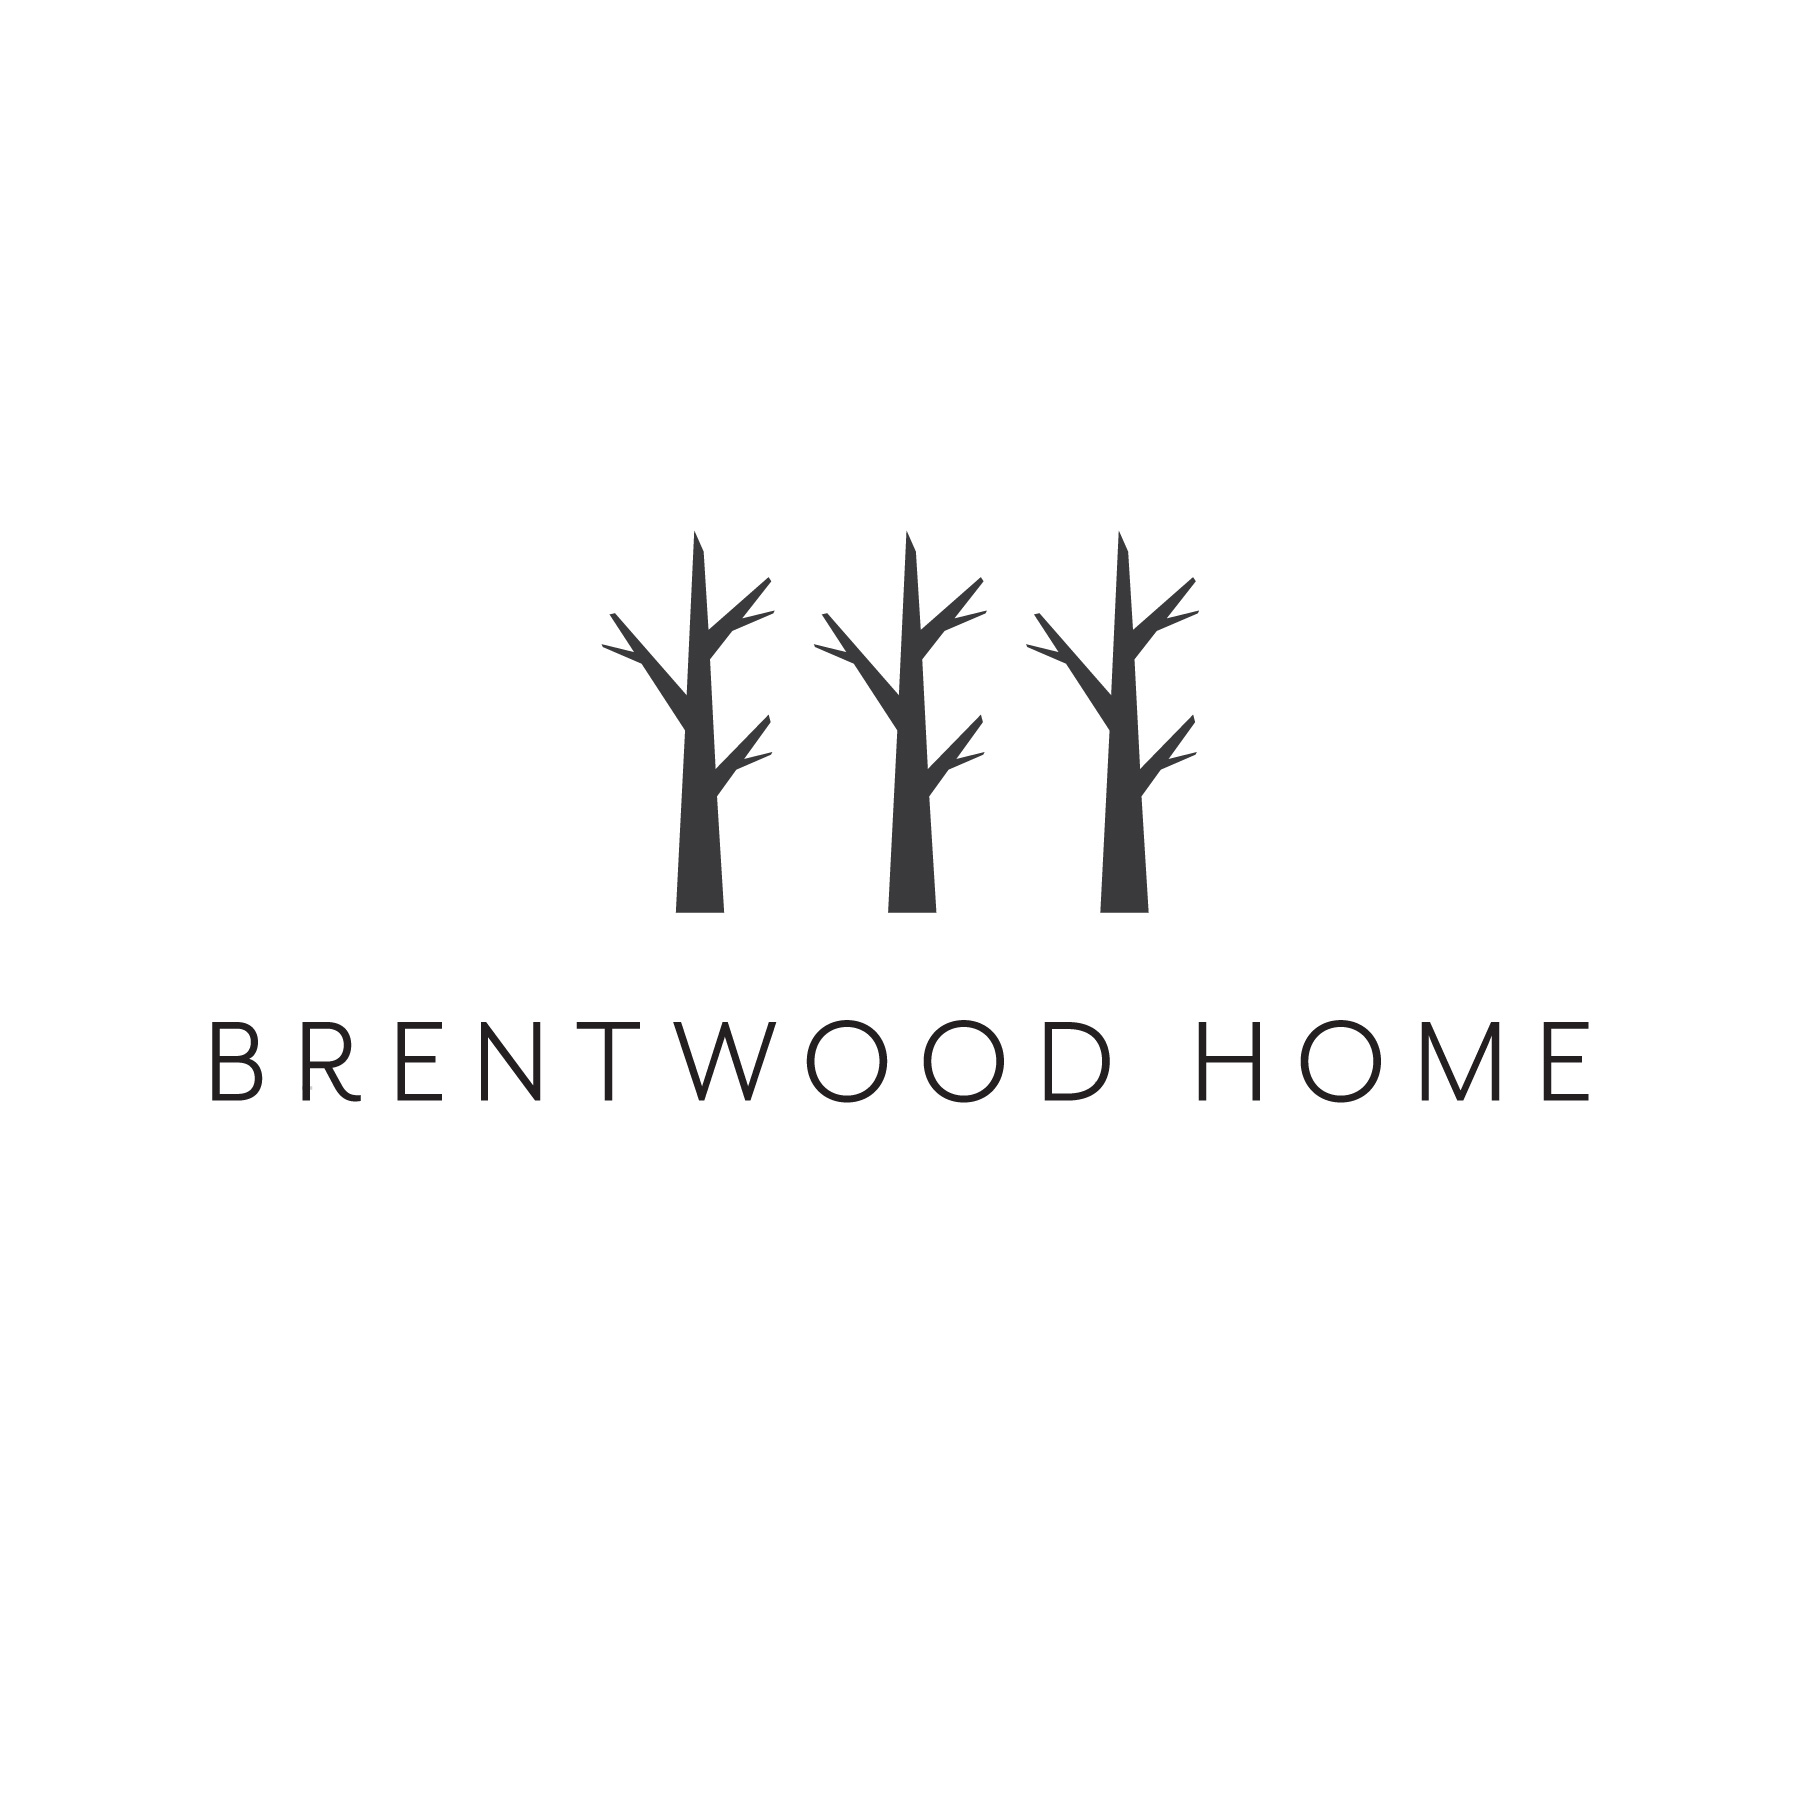 brentwoodhome Logo